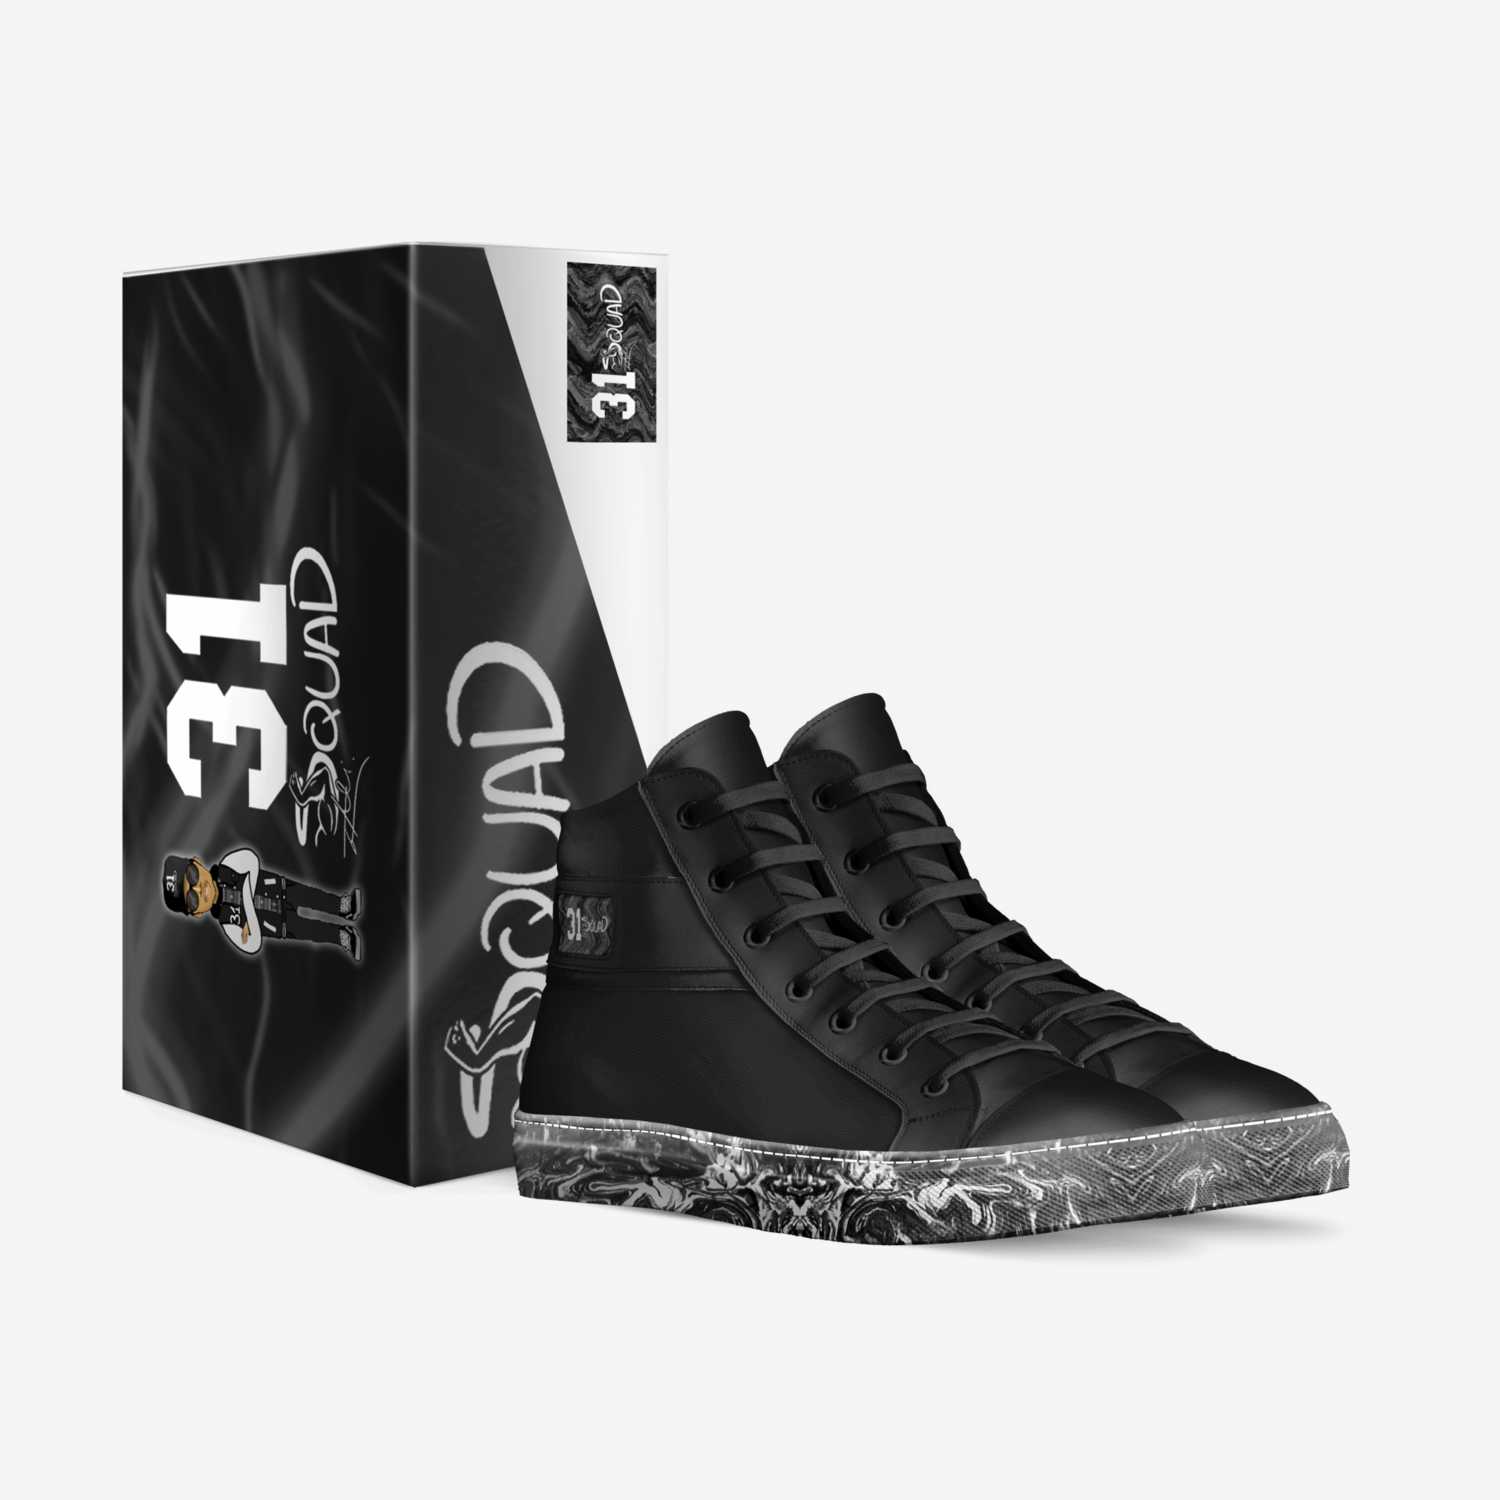 31 Black Ice Vegan custom made in Italy shoes by Ali Tomineek | Box view